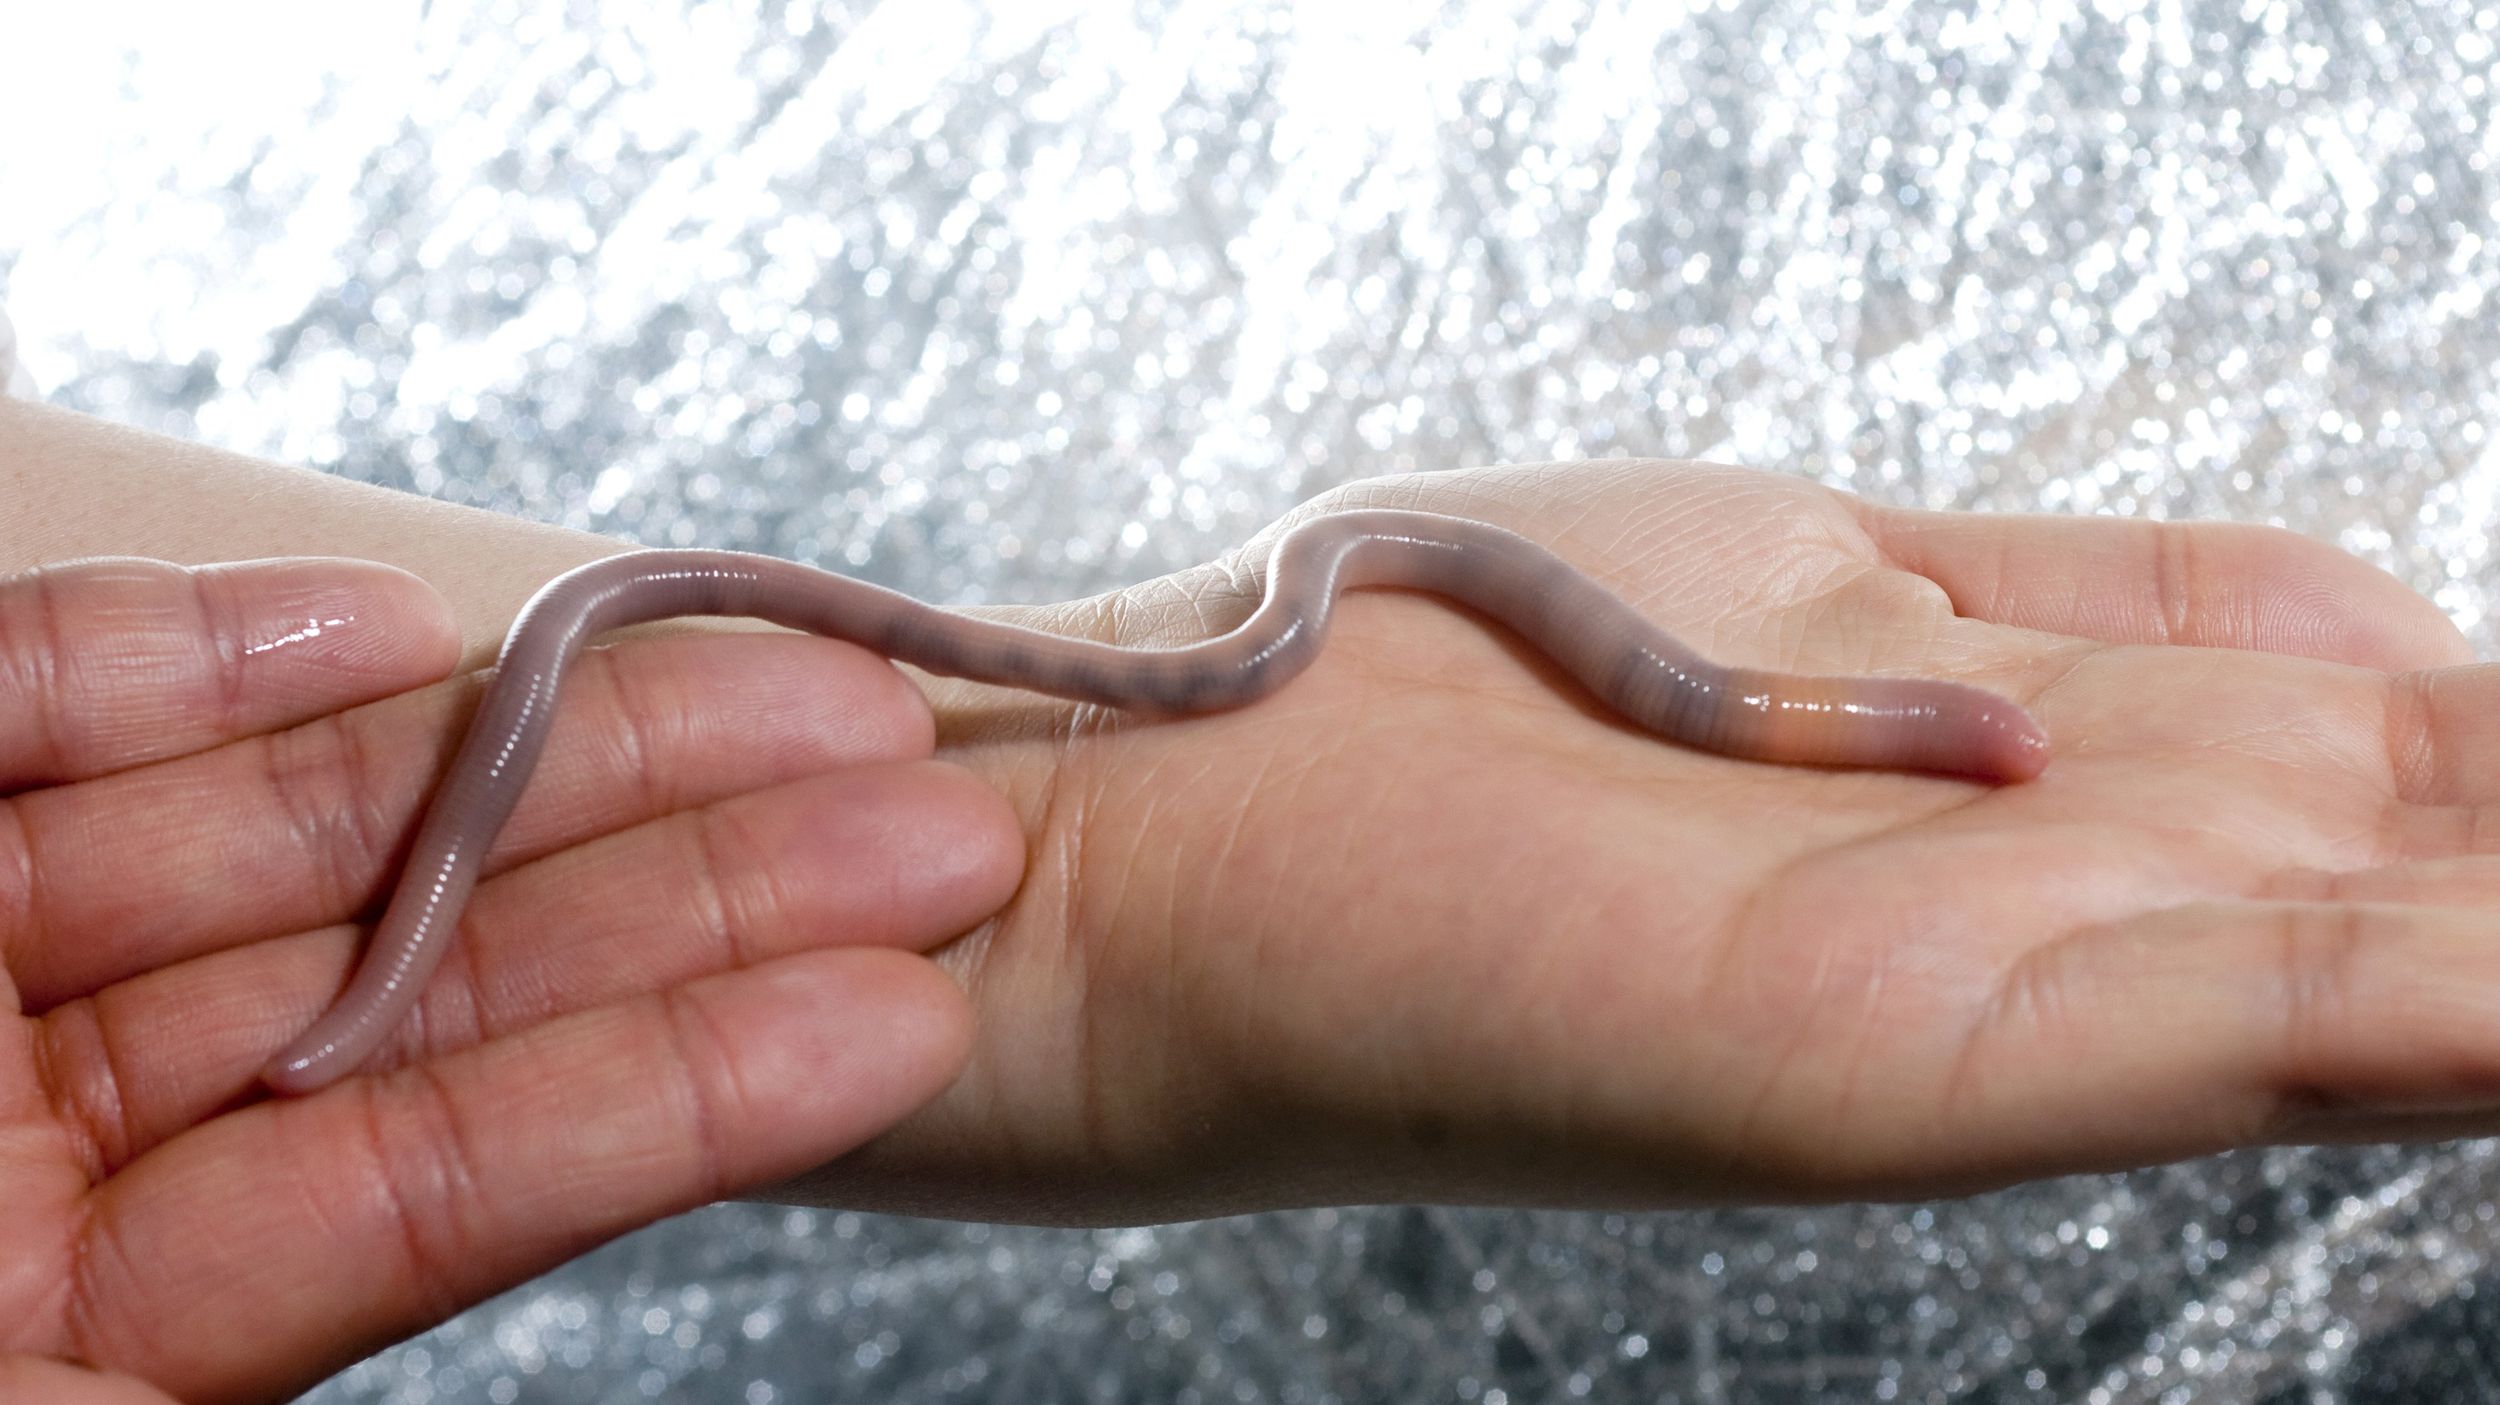 Native giant earthworms are big find for scientists